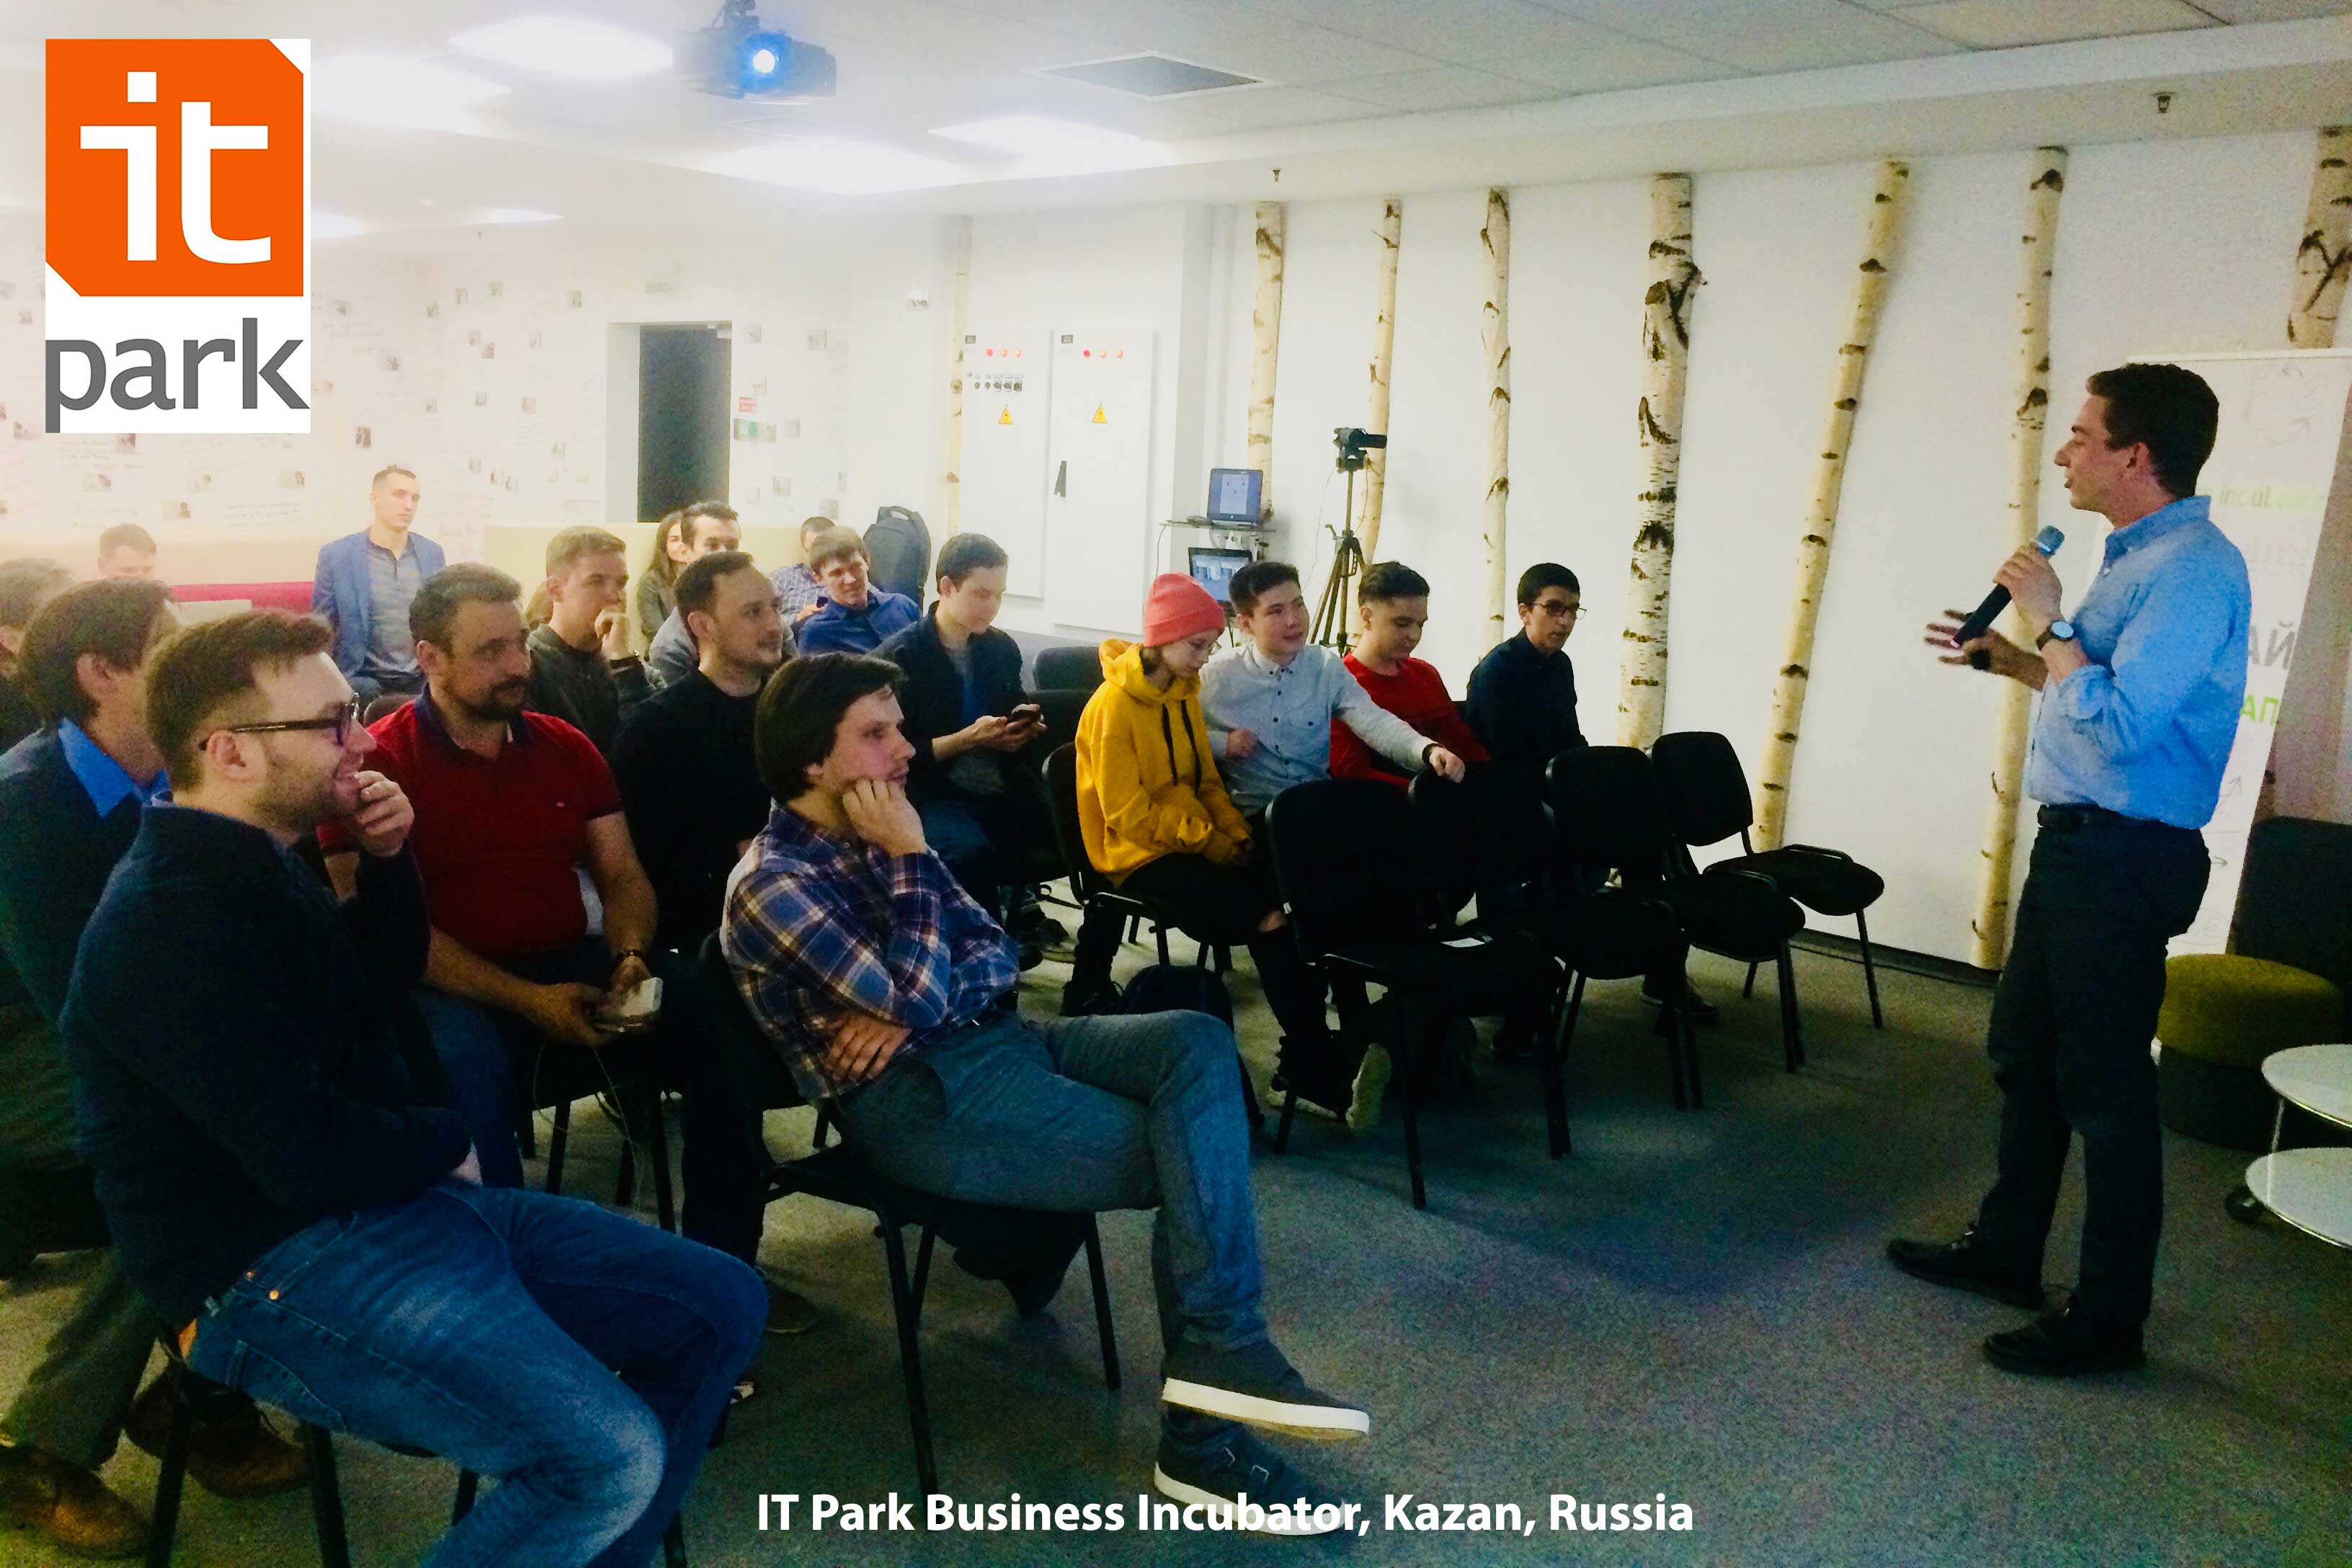 Lecturing on startup trends in the United States at the Kazan IT Park Business Incubator